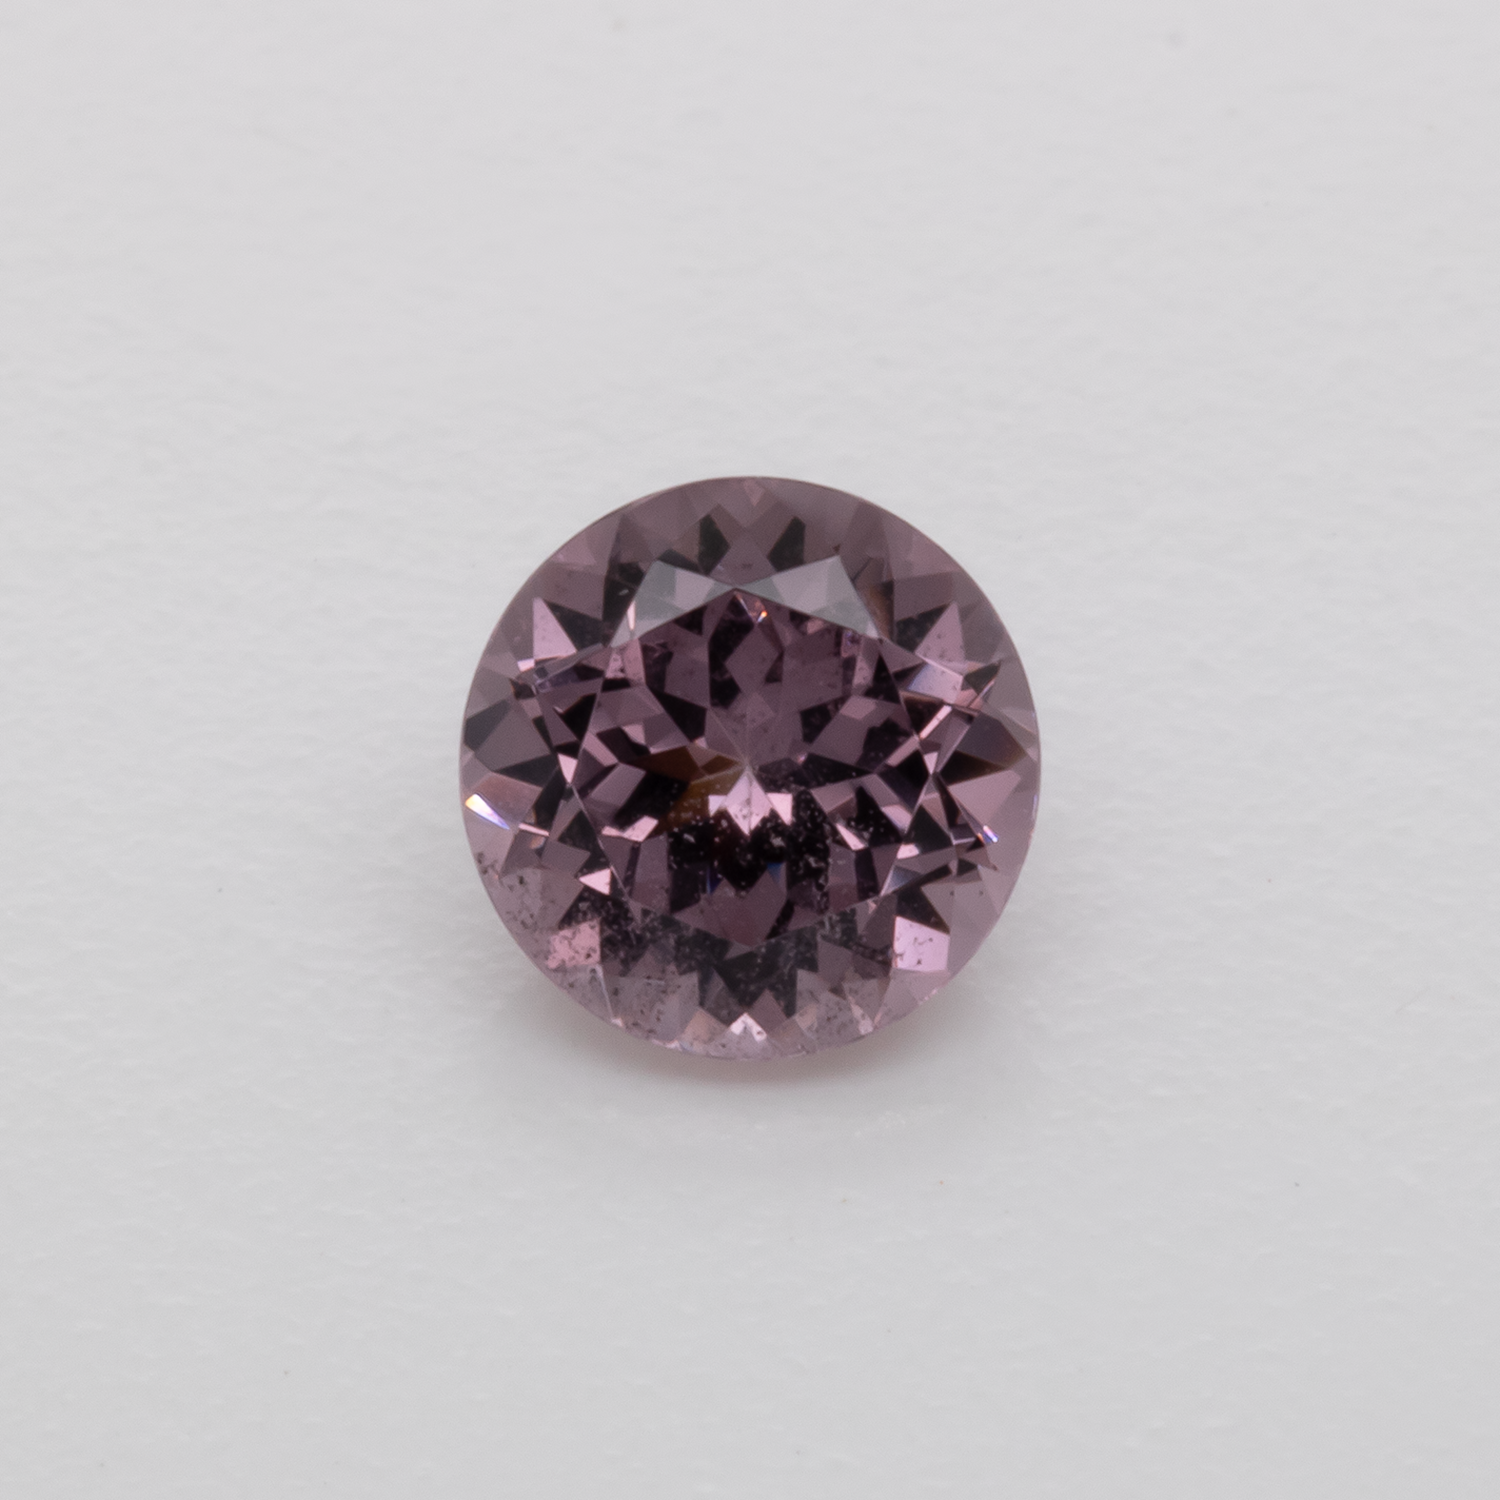 Spinel - pink, round, 5.1x5.1 mm, 0.56 cts, No. SP90014